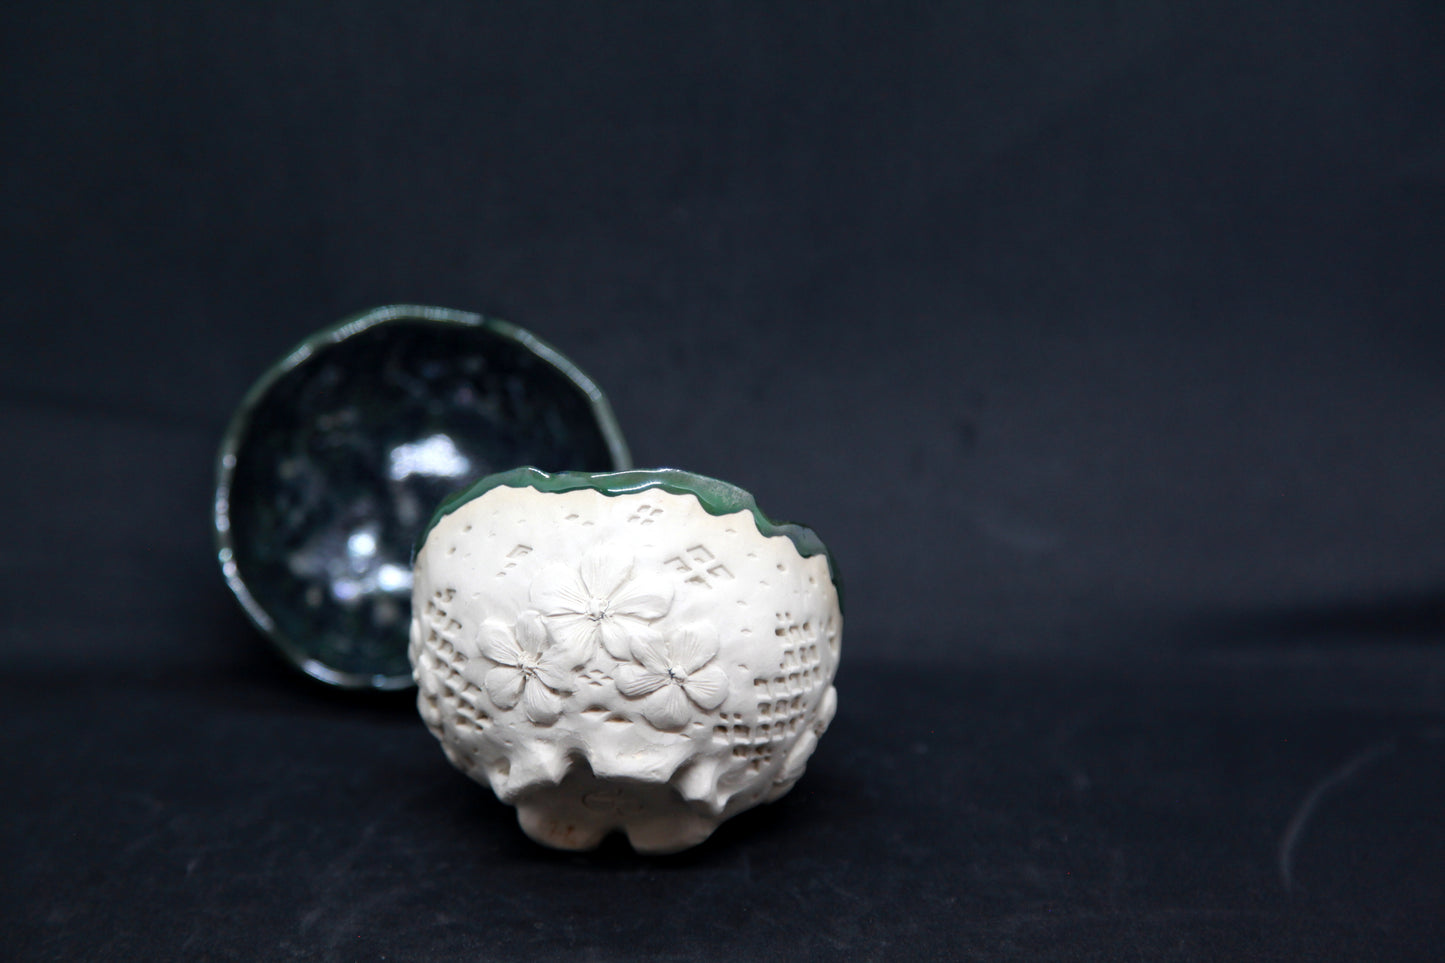 Metal green cups on white clay - flower patterns